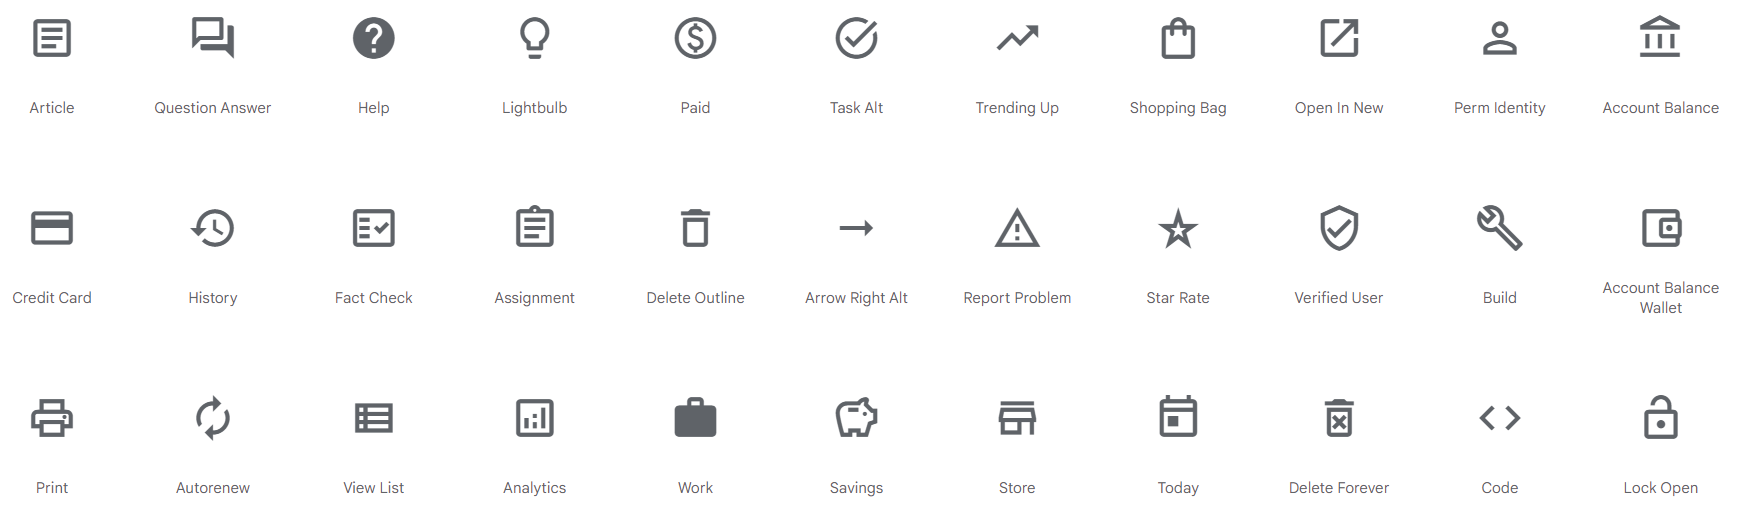 Google Material Icons Icon Set